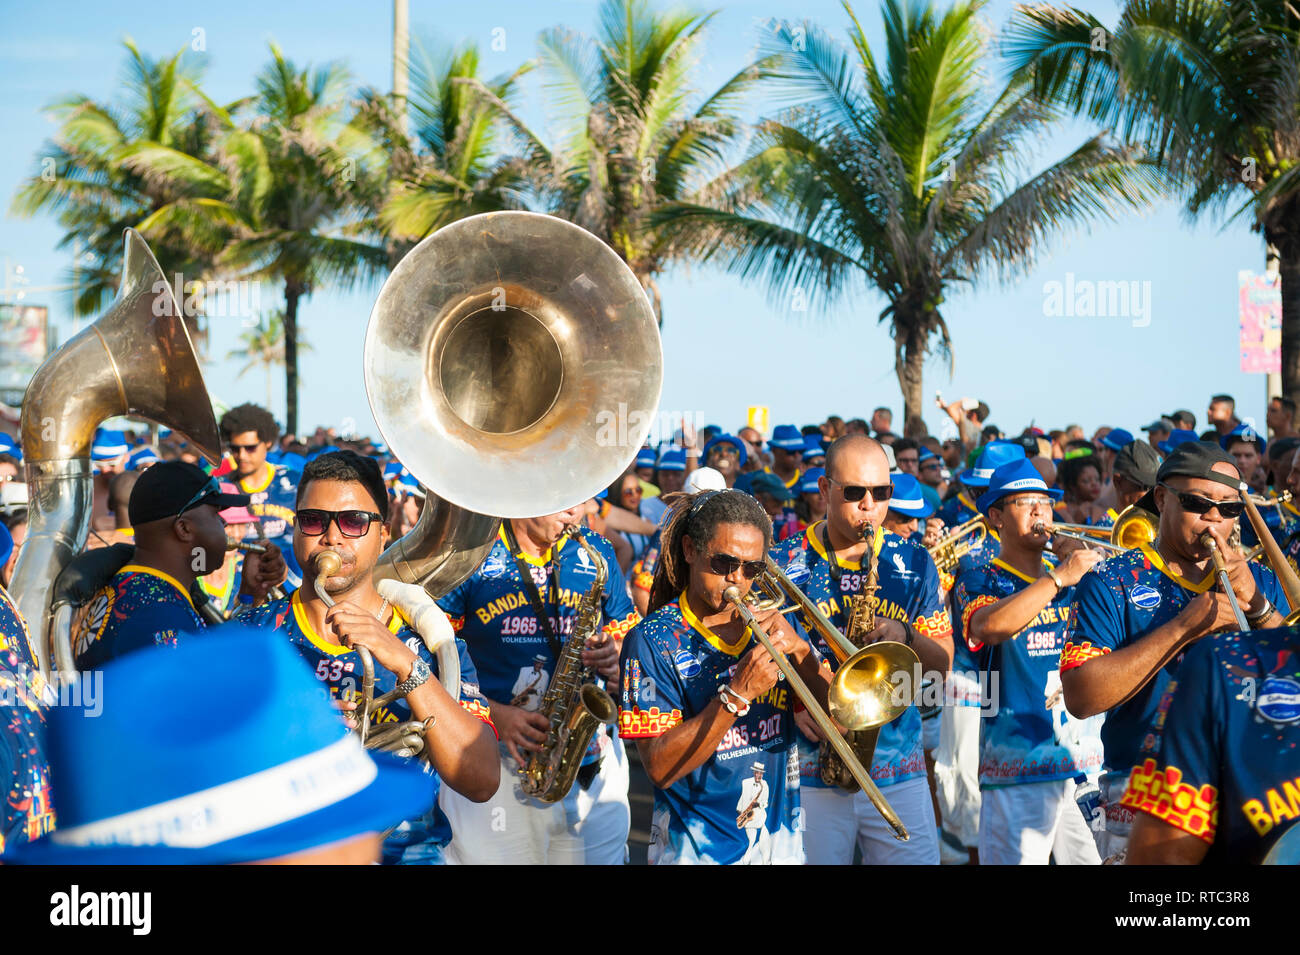 RIO DE JANEIRO - MARCH 15, 2017: A traditional Brazilian marching band attracts large crowds at the iconic Banda de Ipanema Carnival street party. Stock Photo